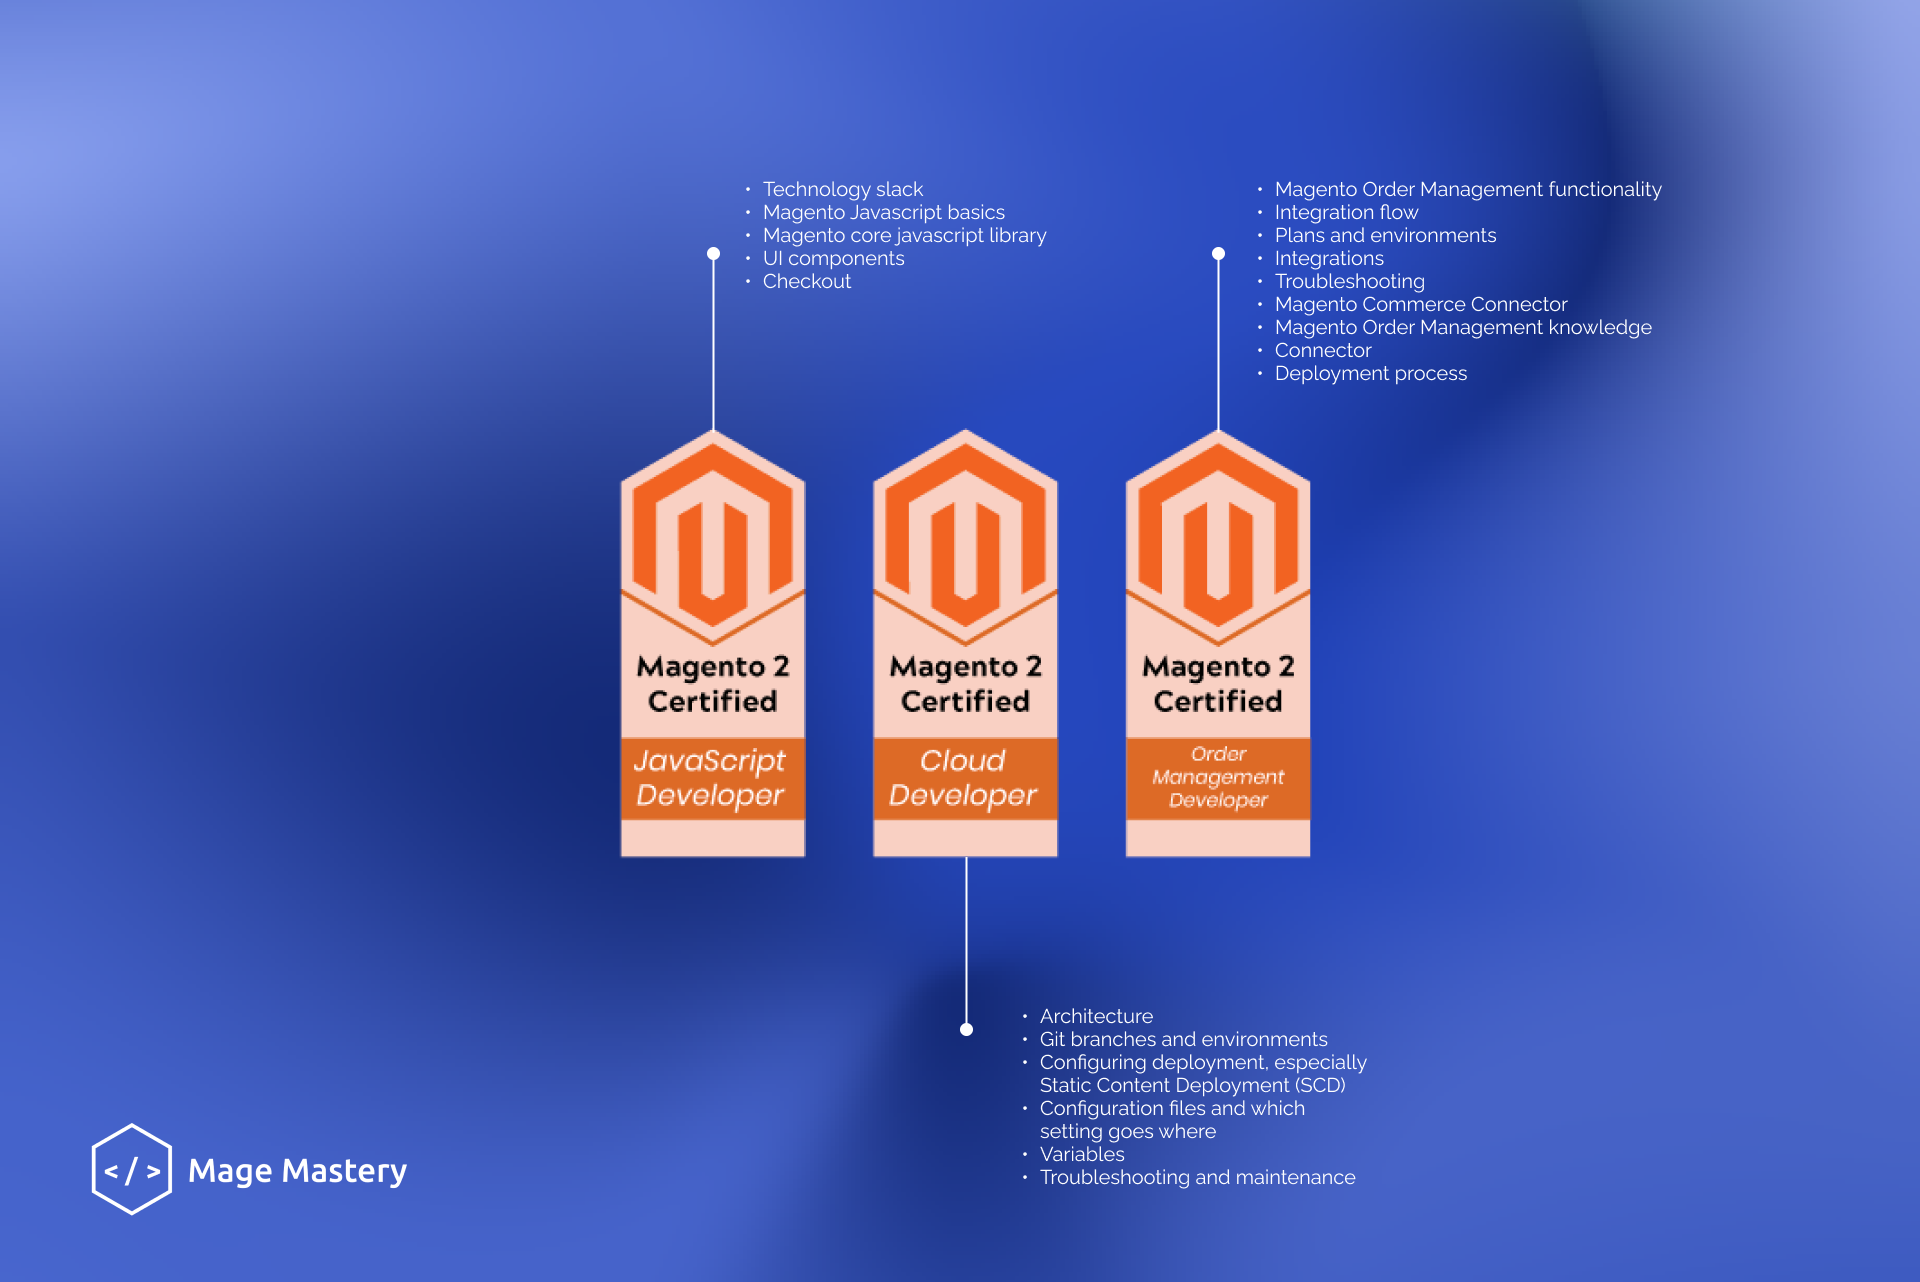 How to get Magento certification? Mage Mastery